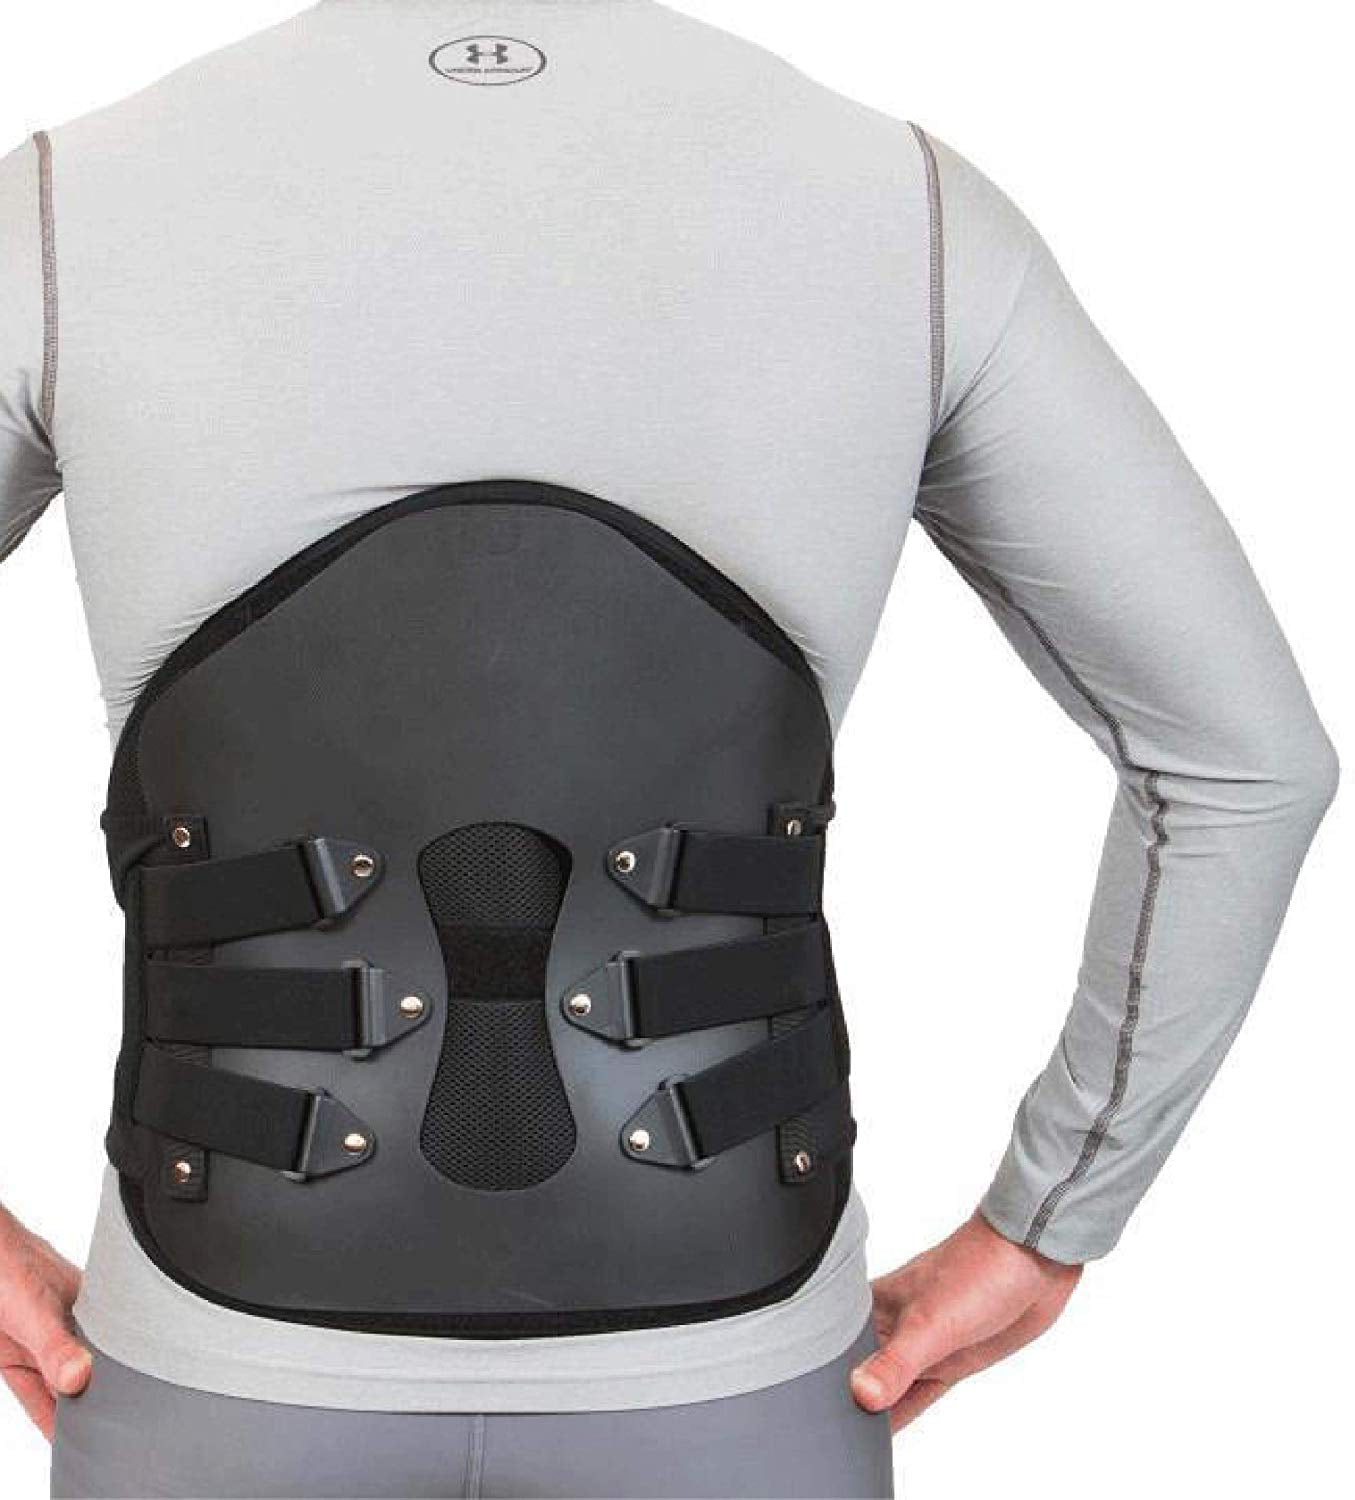 VertaLoc Lift Back Brace for Spinal Support, Relieve Lower Back Pain and Ma...